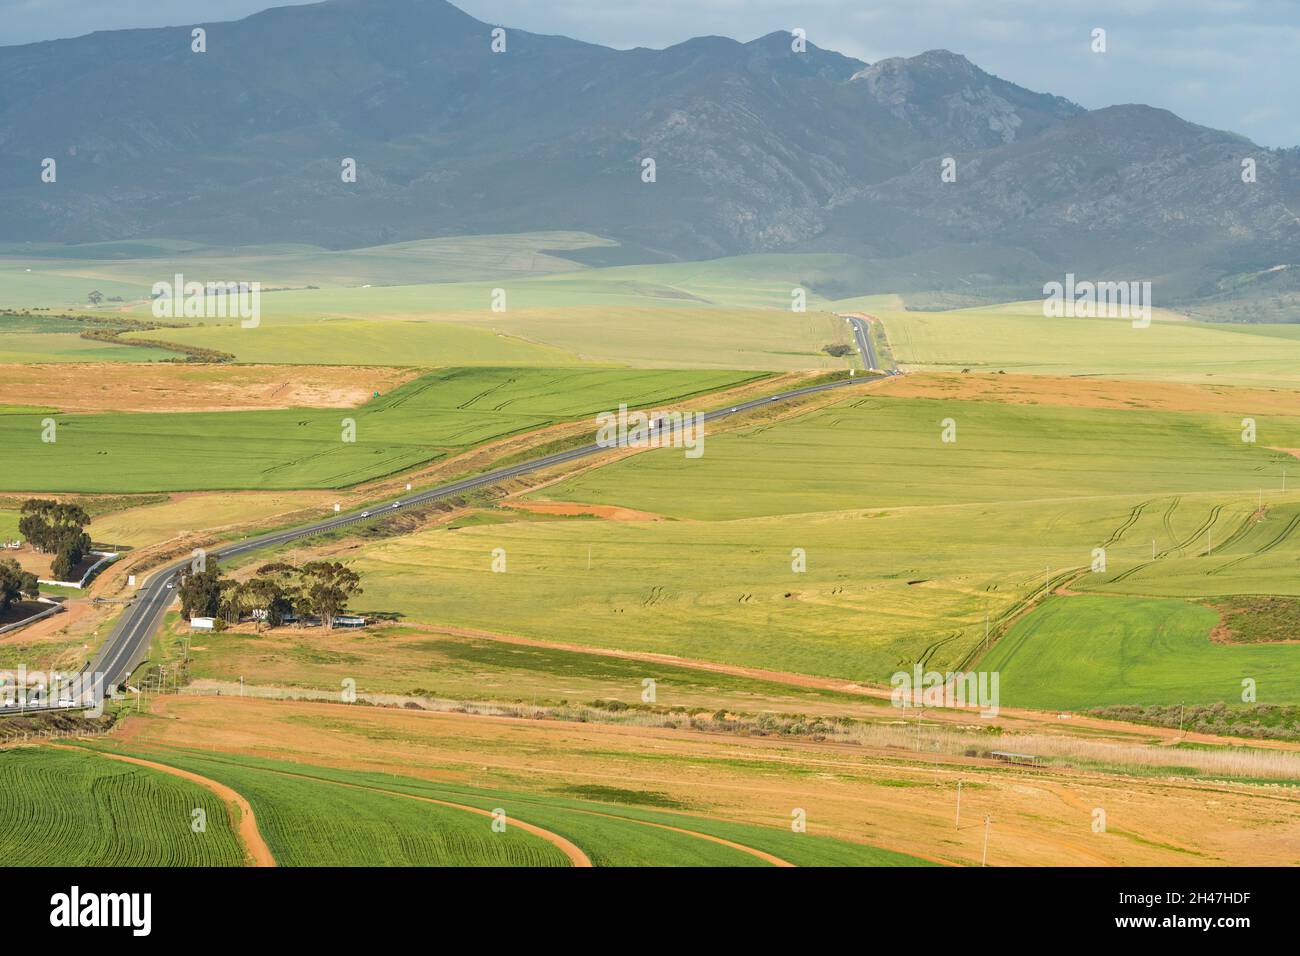 aerial agricultural landscape over farms in the Overberg, Western Cape, South Africa in Spring with a road or highway Stock Photo